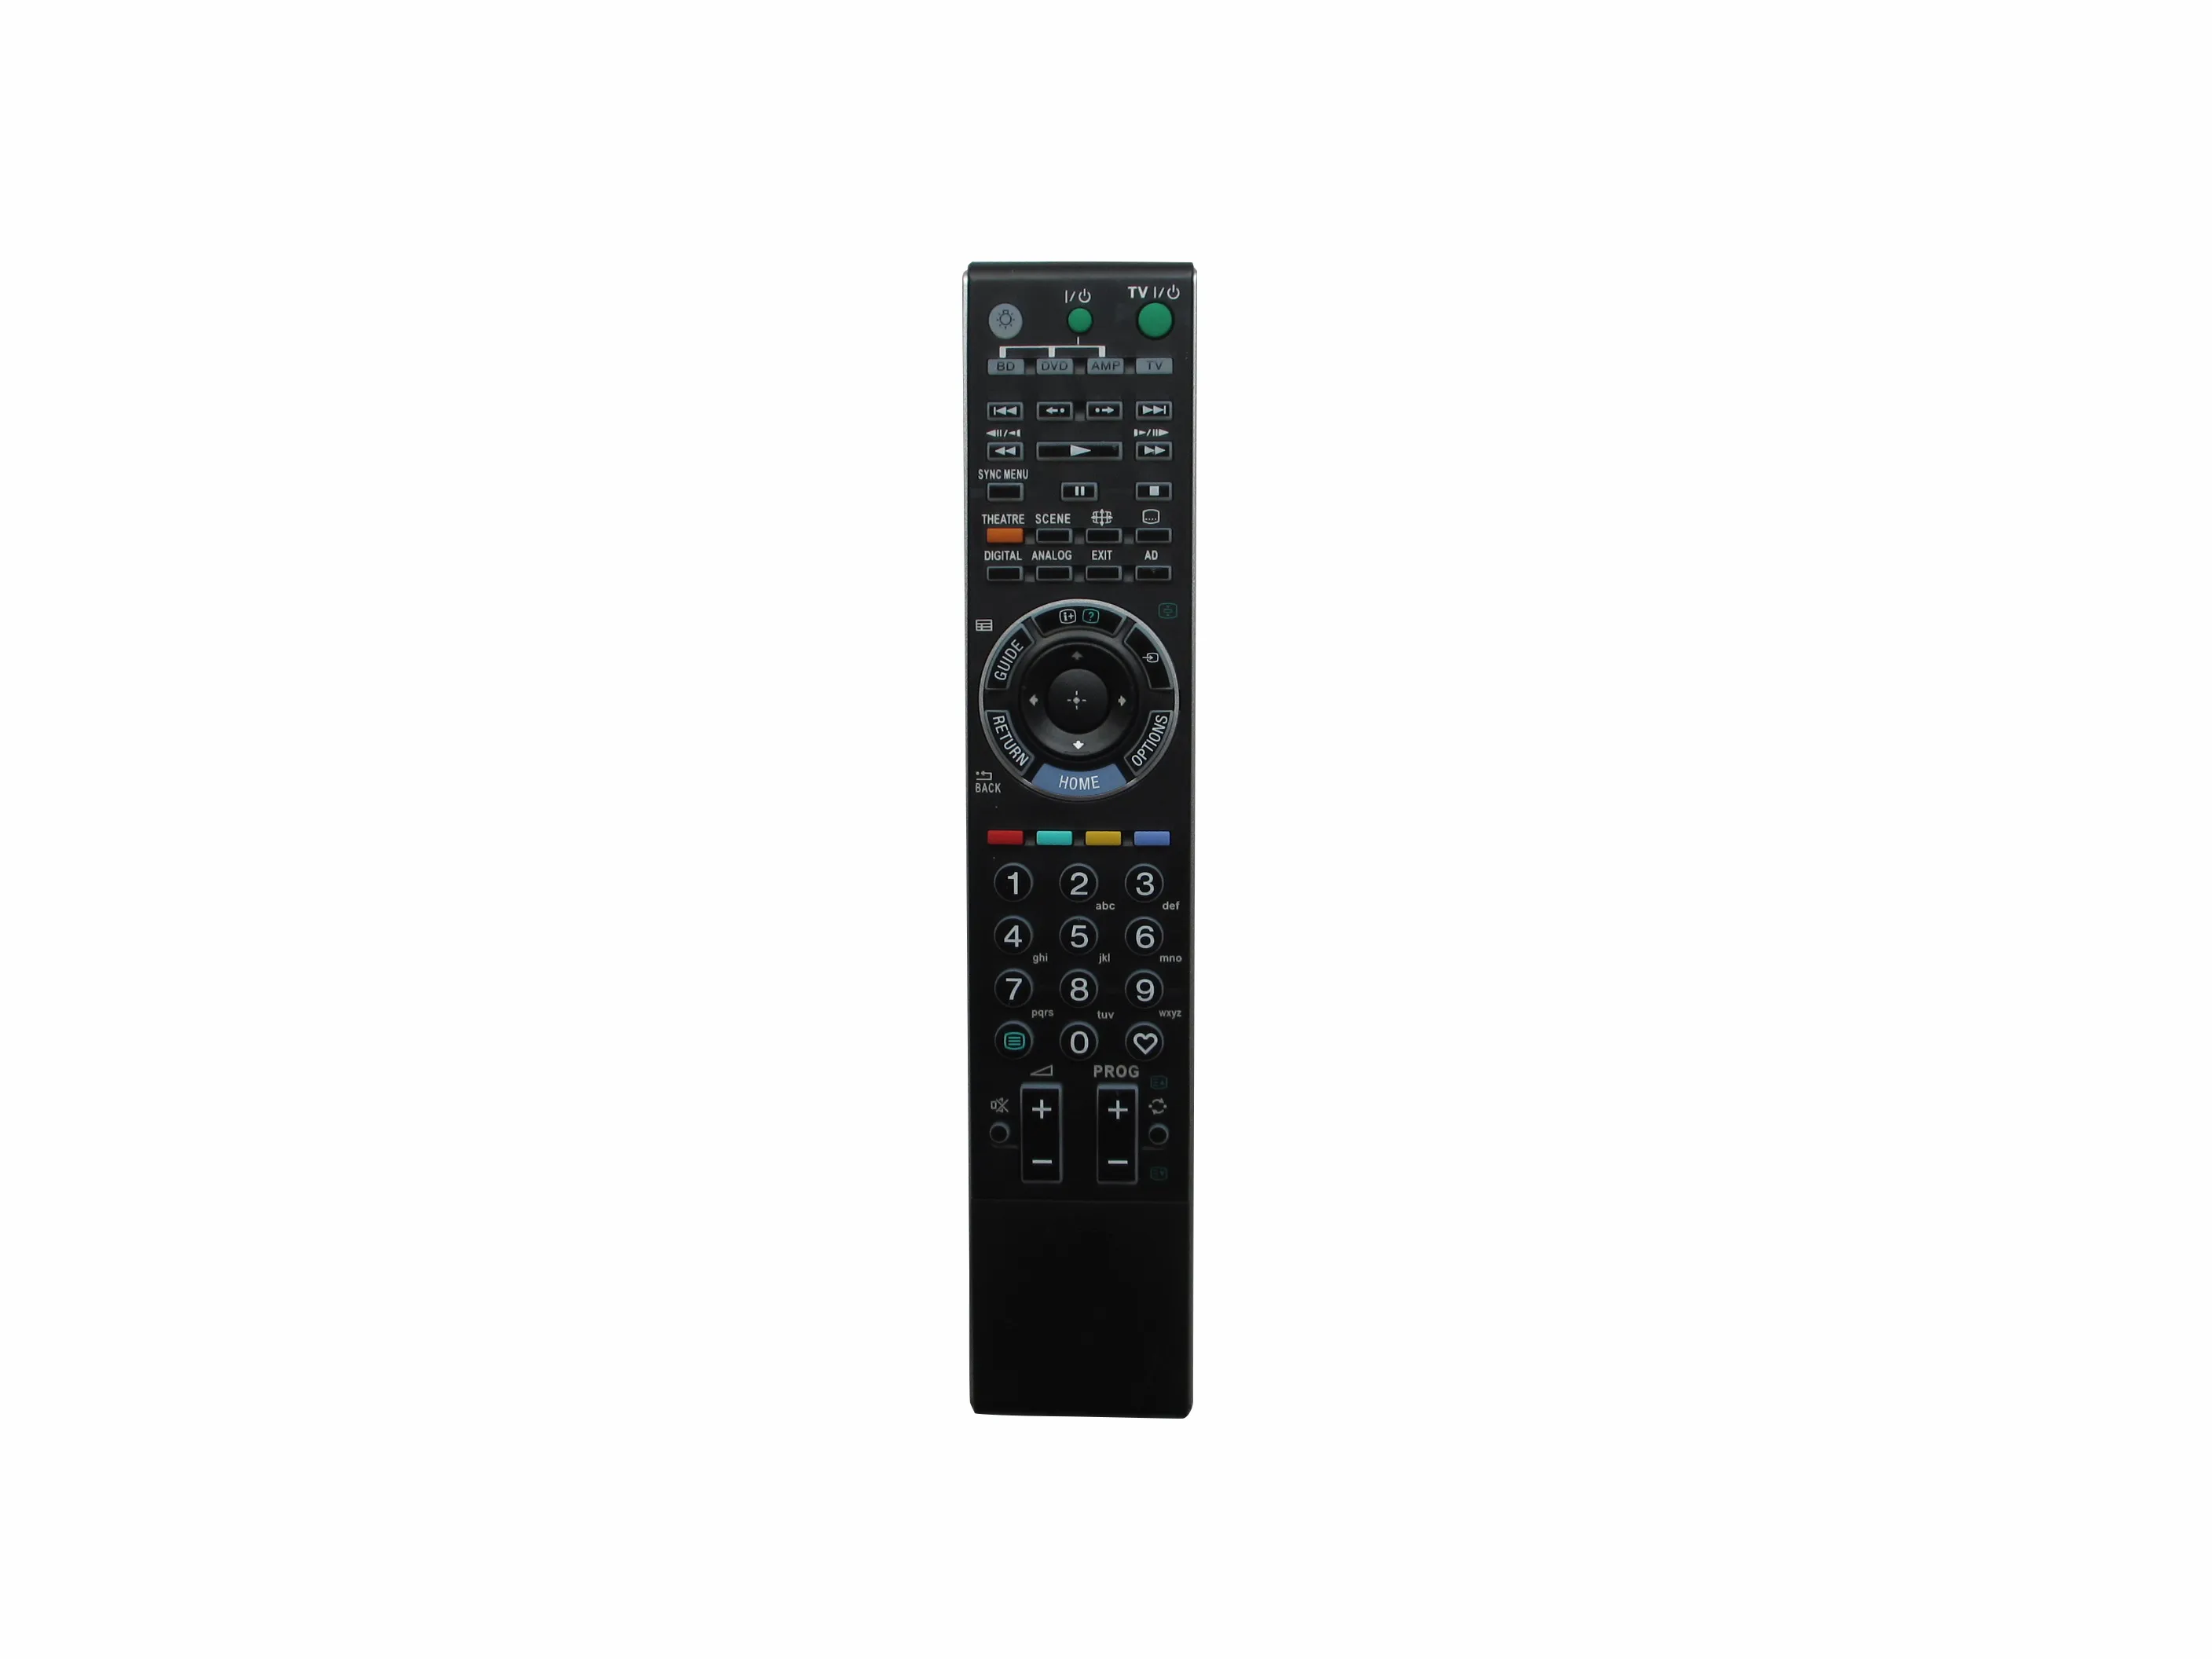 Remote Control For Sony RM-EA002 RM-EA006 RM-ED007 RM-ED009 RM-ED011 RM-ED011W RM-ED012 RM-014 RM-ED013 RM-ED033 RM-W104 RM-W105 RM-W109 RM-Y101 RM-Y145 LCD LED HDTV TV